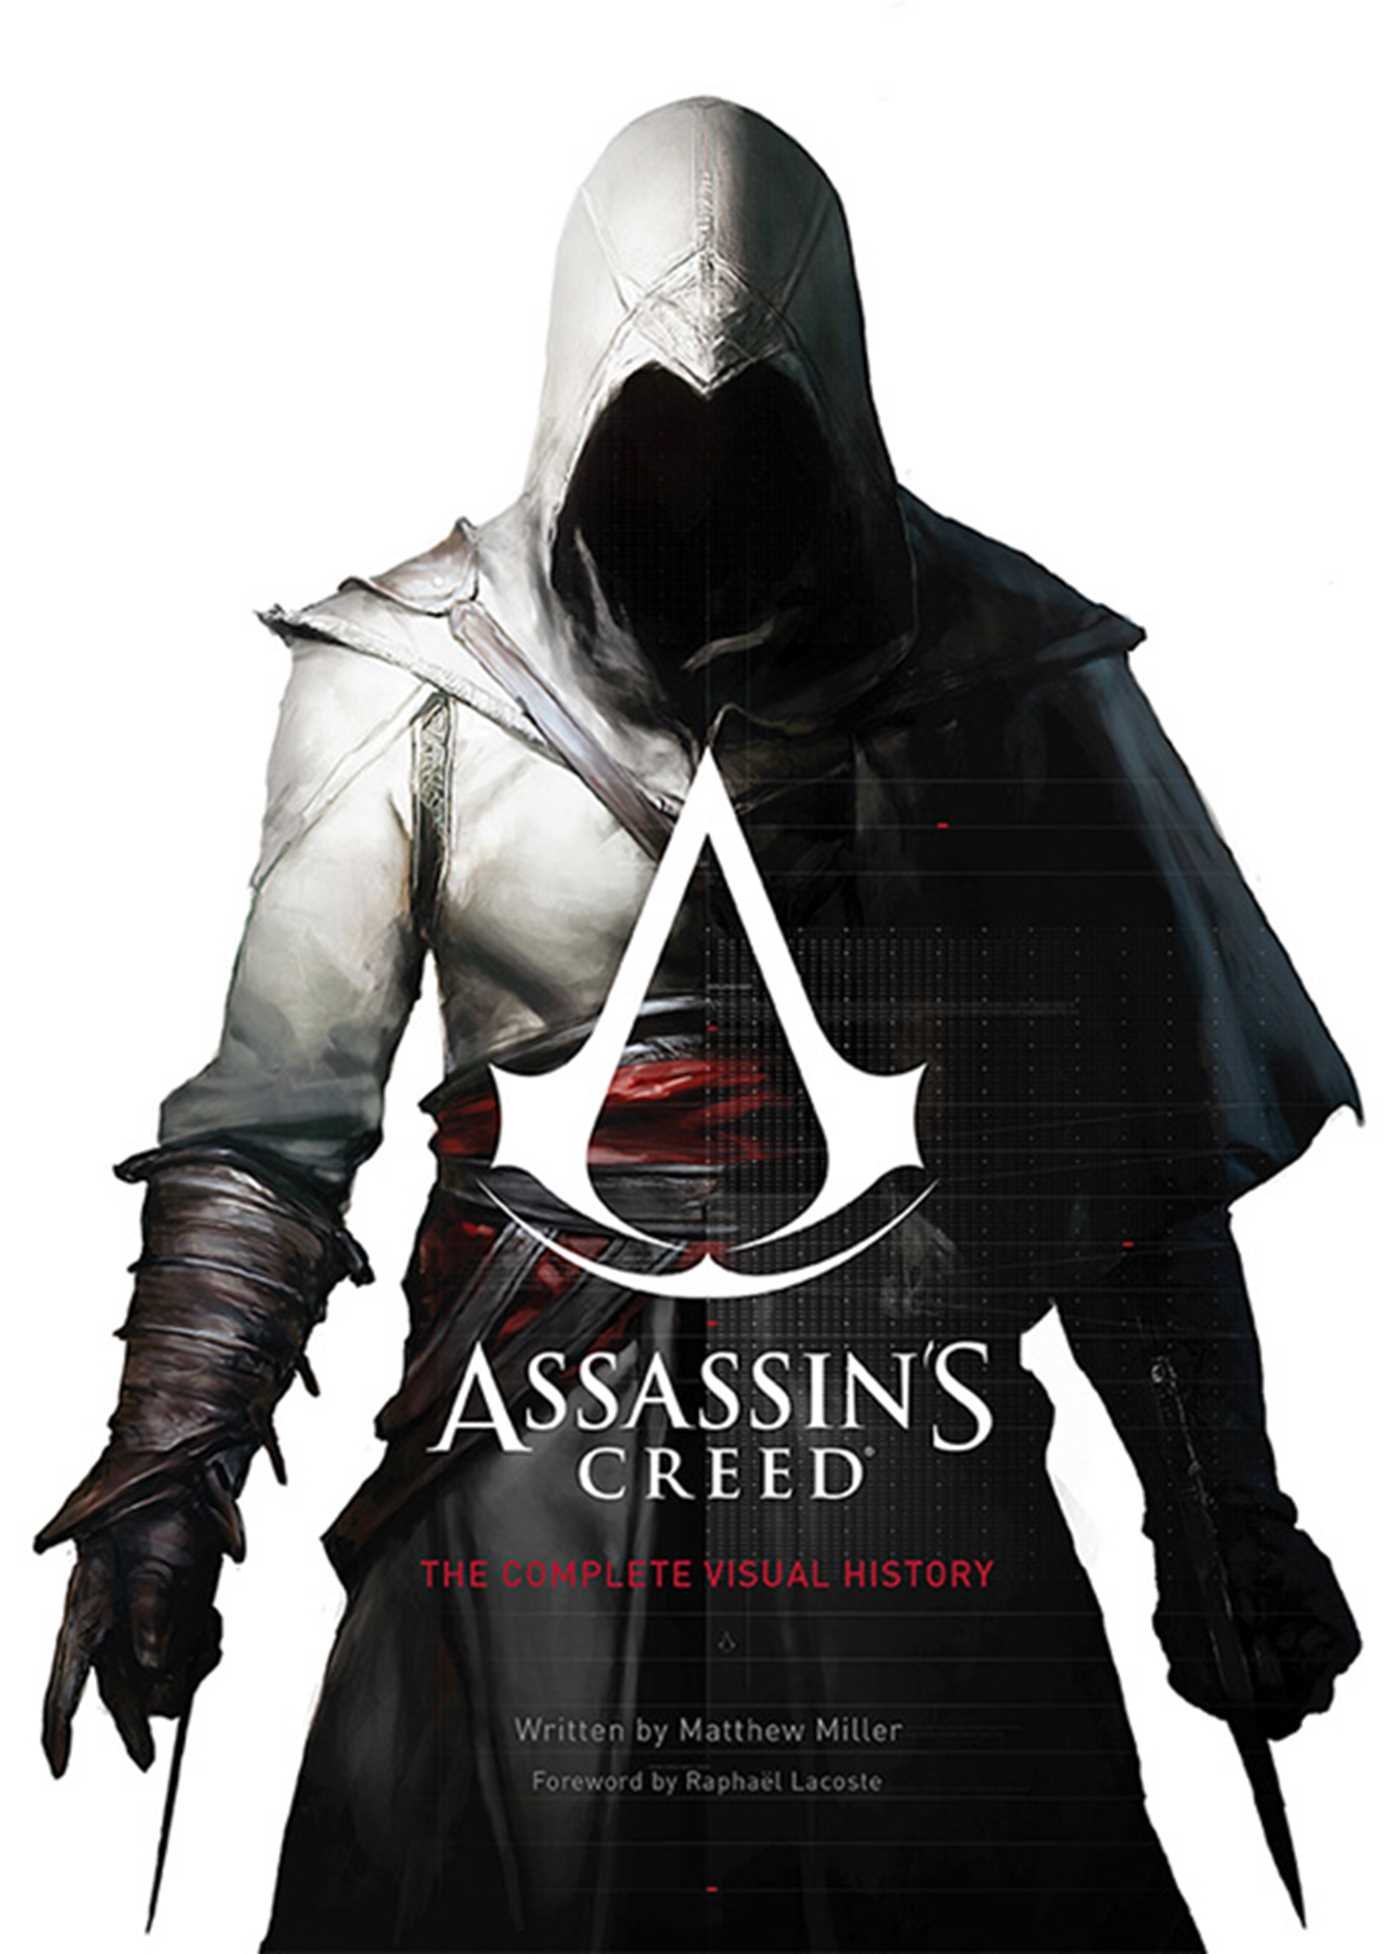 History of the Assassins, Assassin's Creed Wiki